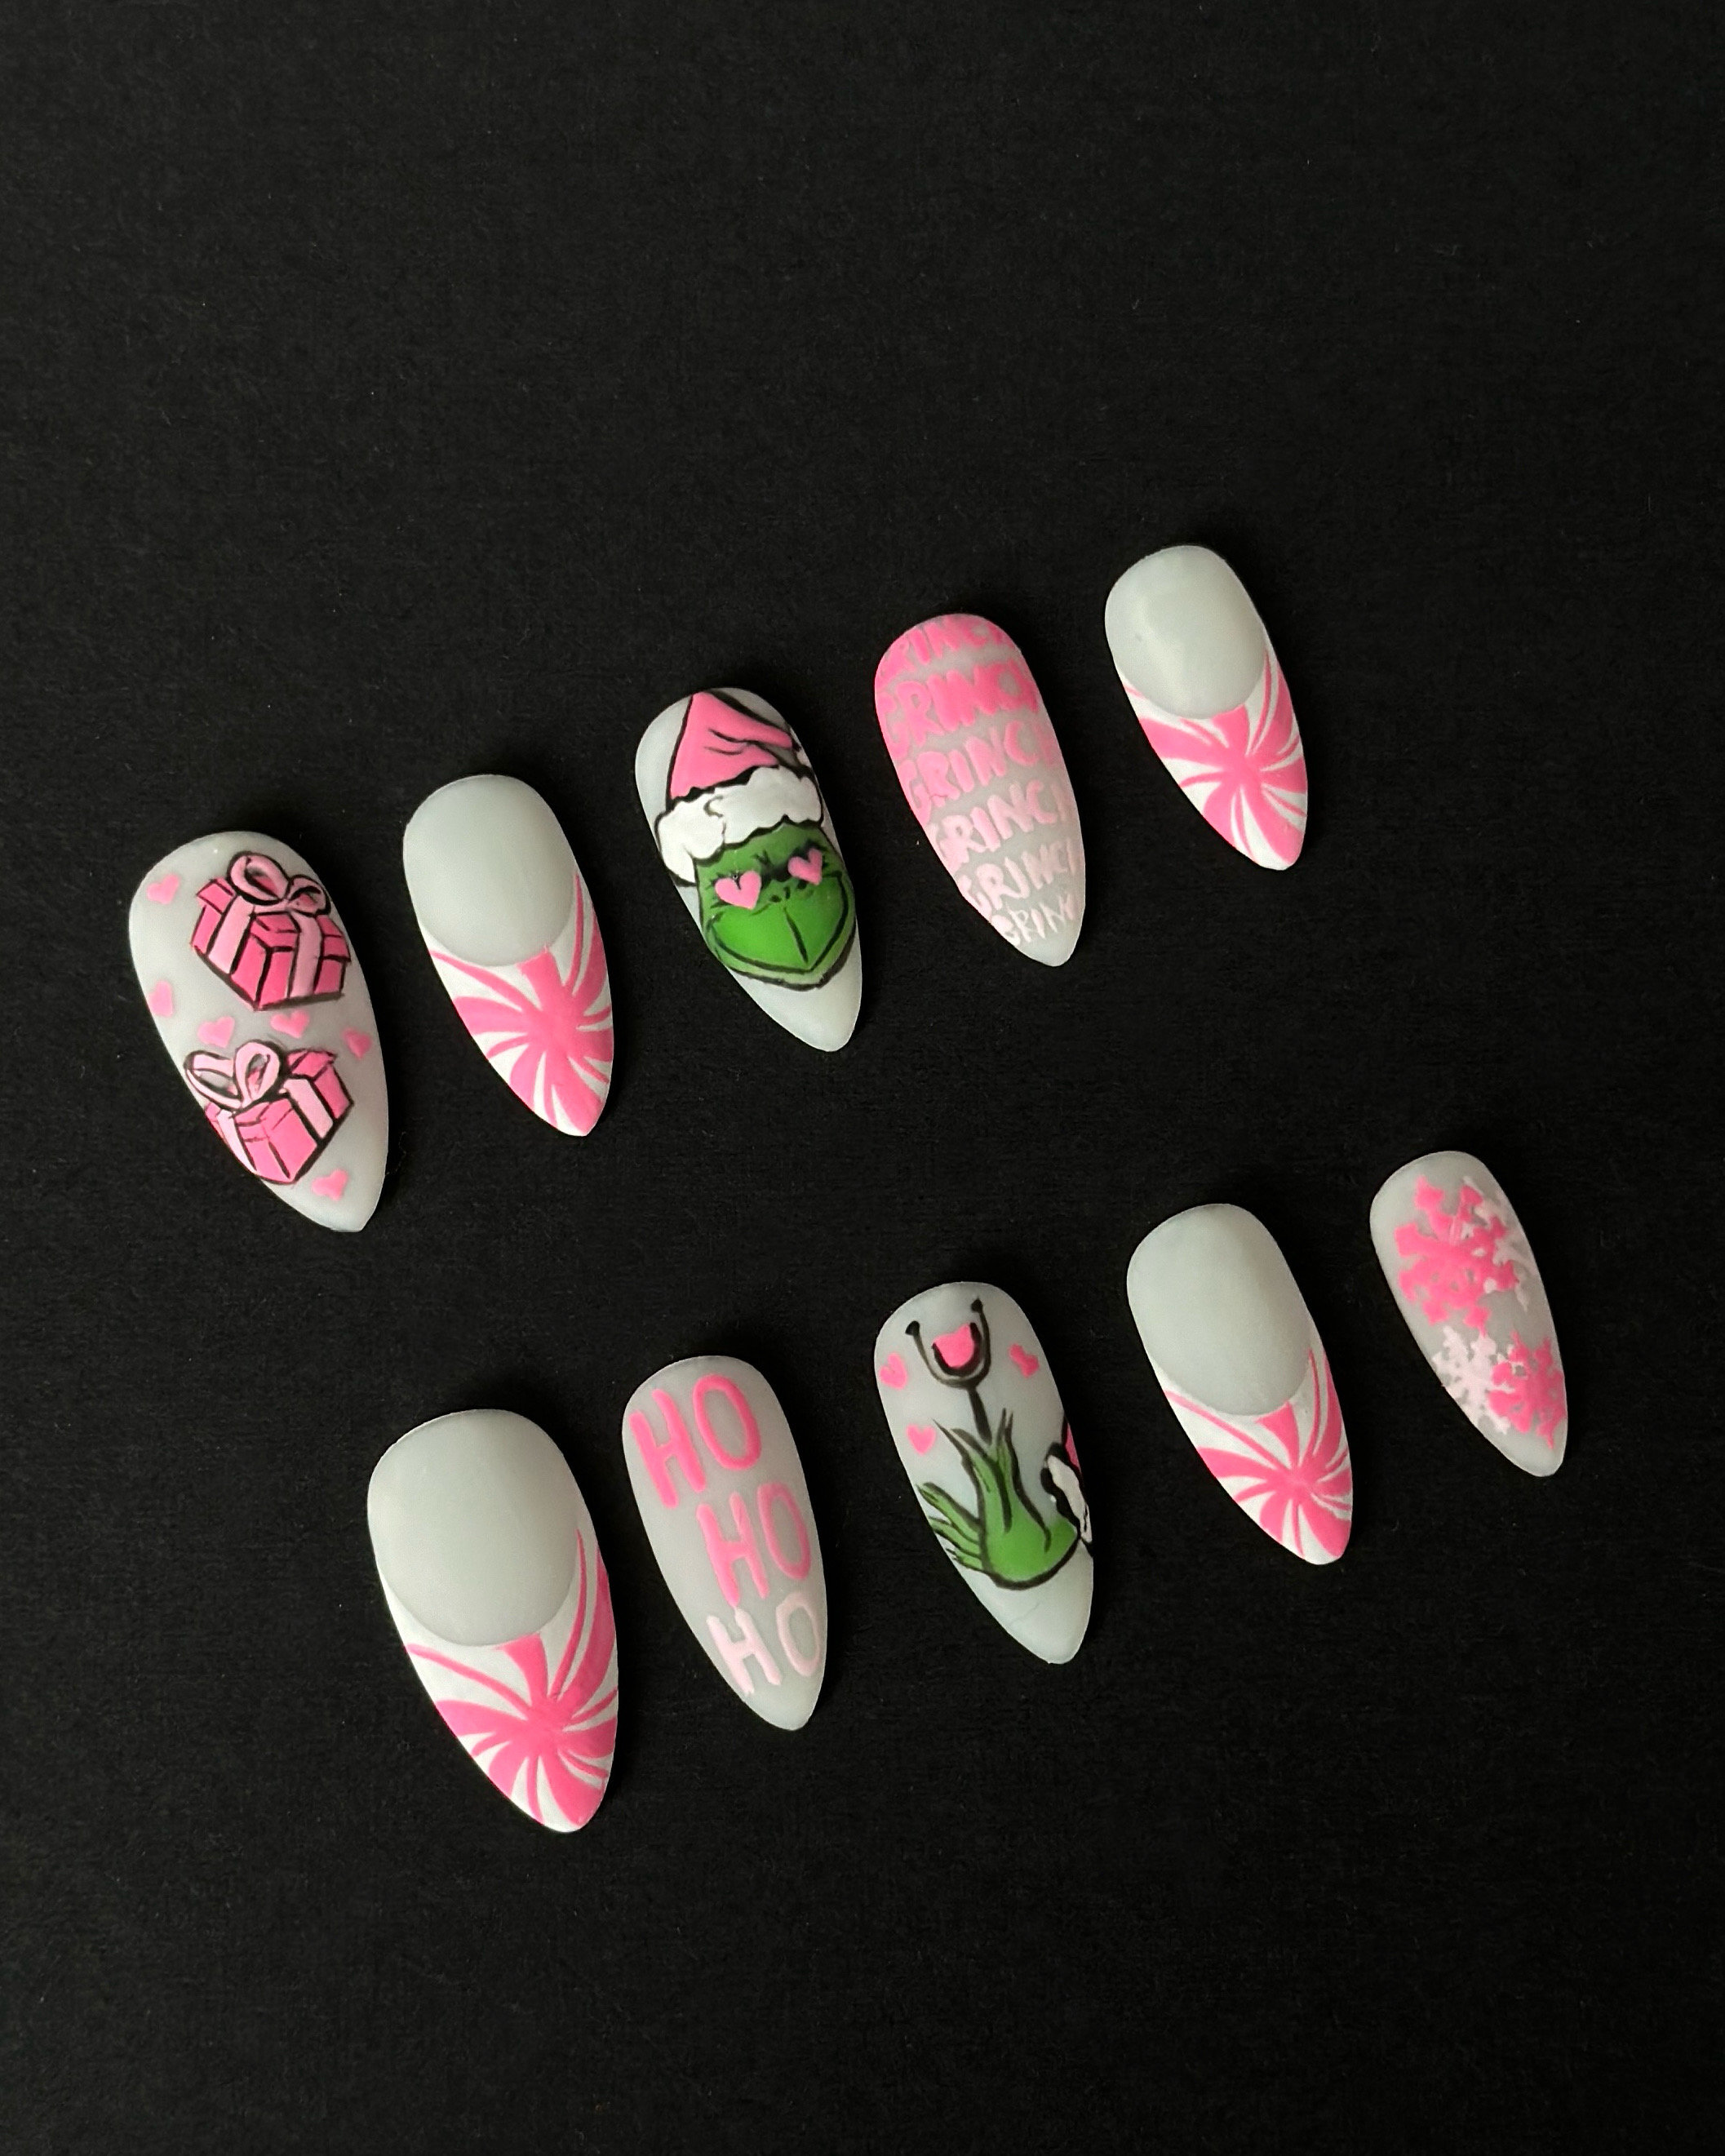 Holiday Christmas - Christmas Grinch #1 Grinch Ornament Smile Green Face  Nail Decals - WaterSlide Nail Art Decals Salon Quality DIY Manicure Nail